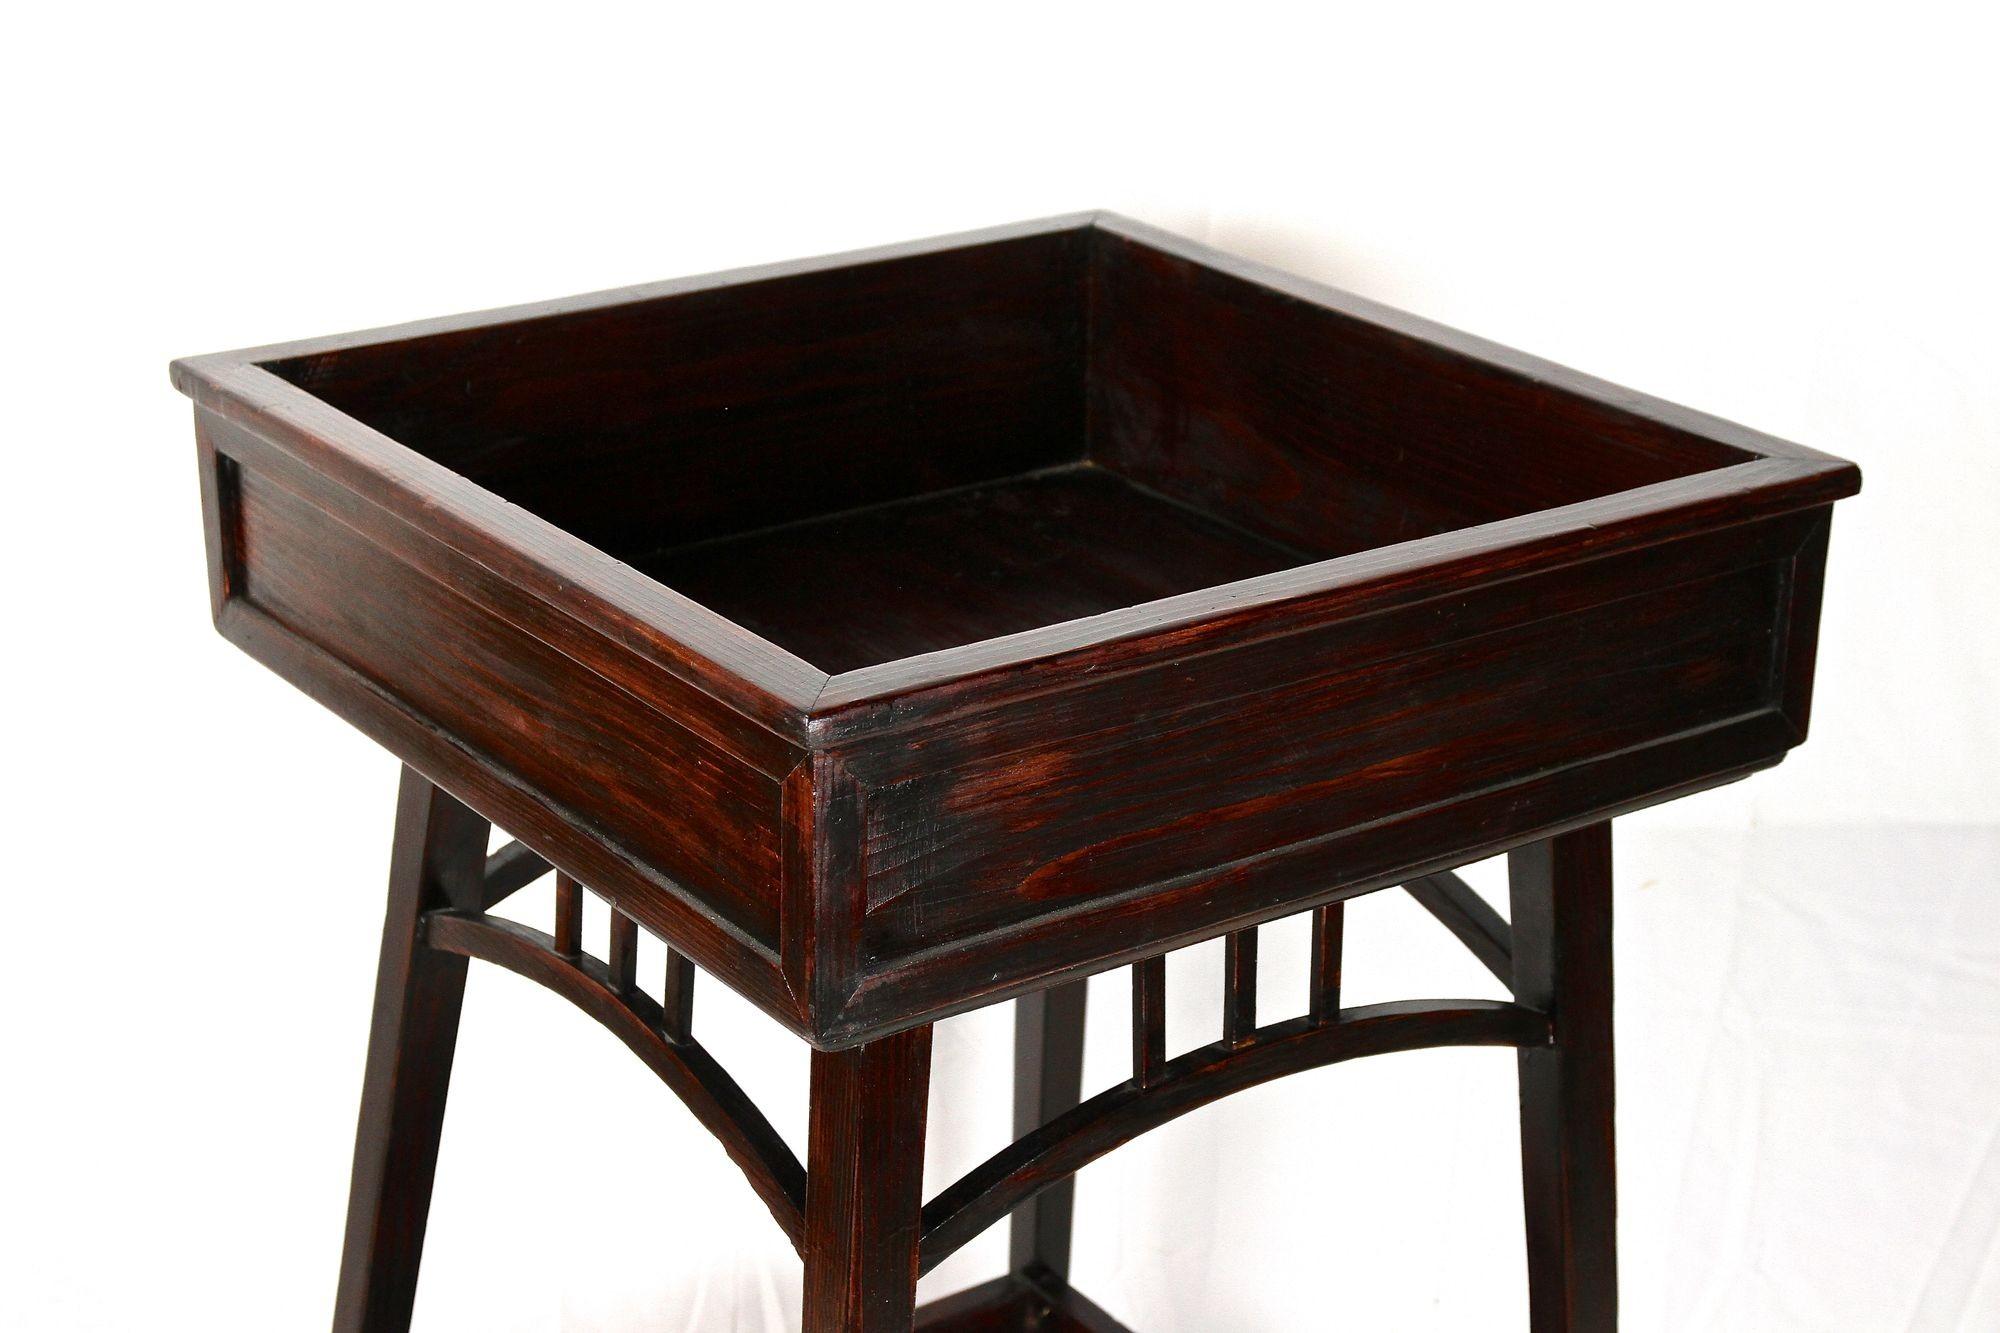 Unusual early 20th Century Art Nouveau flower tub out of Austria from the period around 1905. Made of beechwood and trimmed to a dark mahogany style, this amazing looking pedestal/ flower tub is an absolute eyecatcher. With a large 